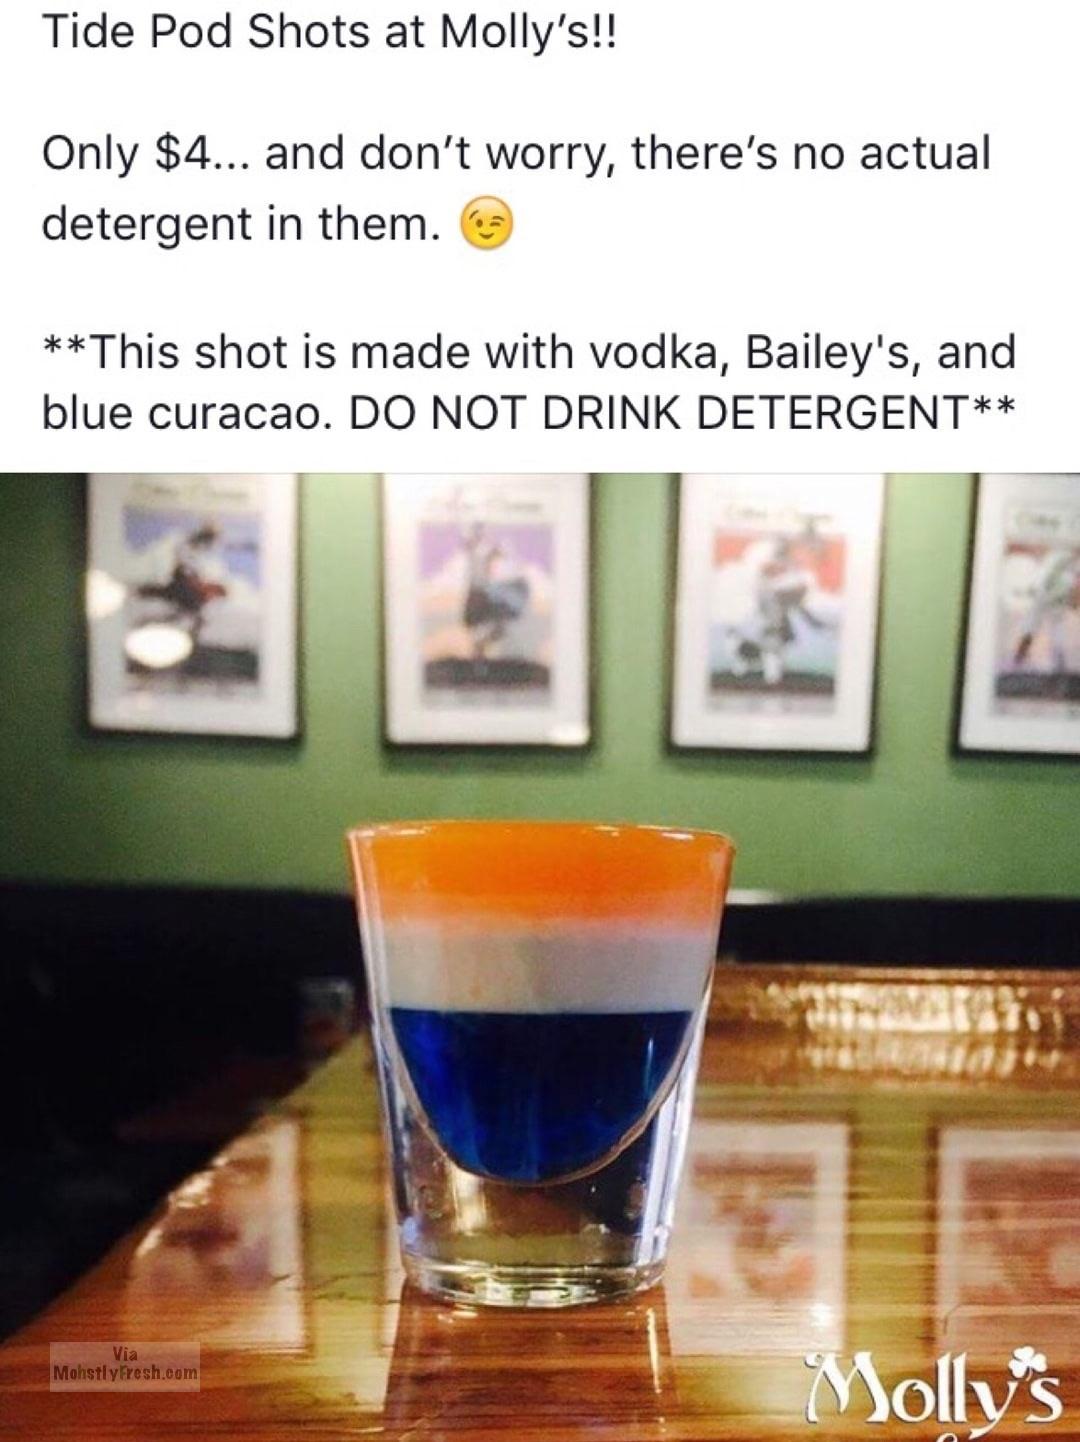 tide pod shots - Tide Pod Shots at Molly's!! Only $4... and don't worry, there's no actual detergent in them. This shot is made with vodka, Bailey's, and blue curacao. Do Not Drink Detergent Mohstly Fresh.com Molly's